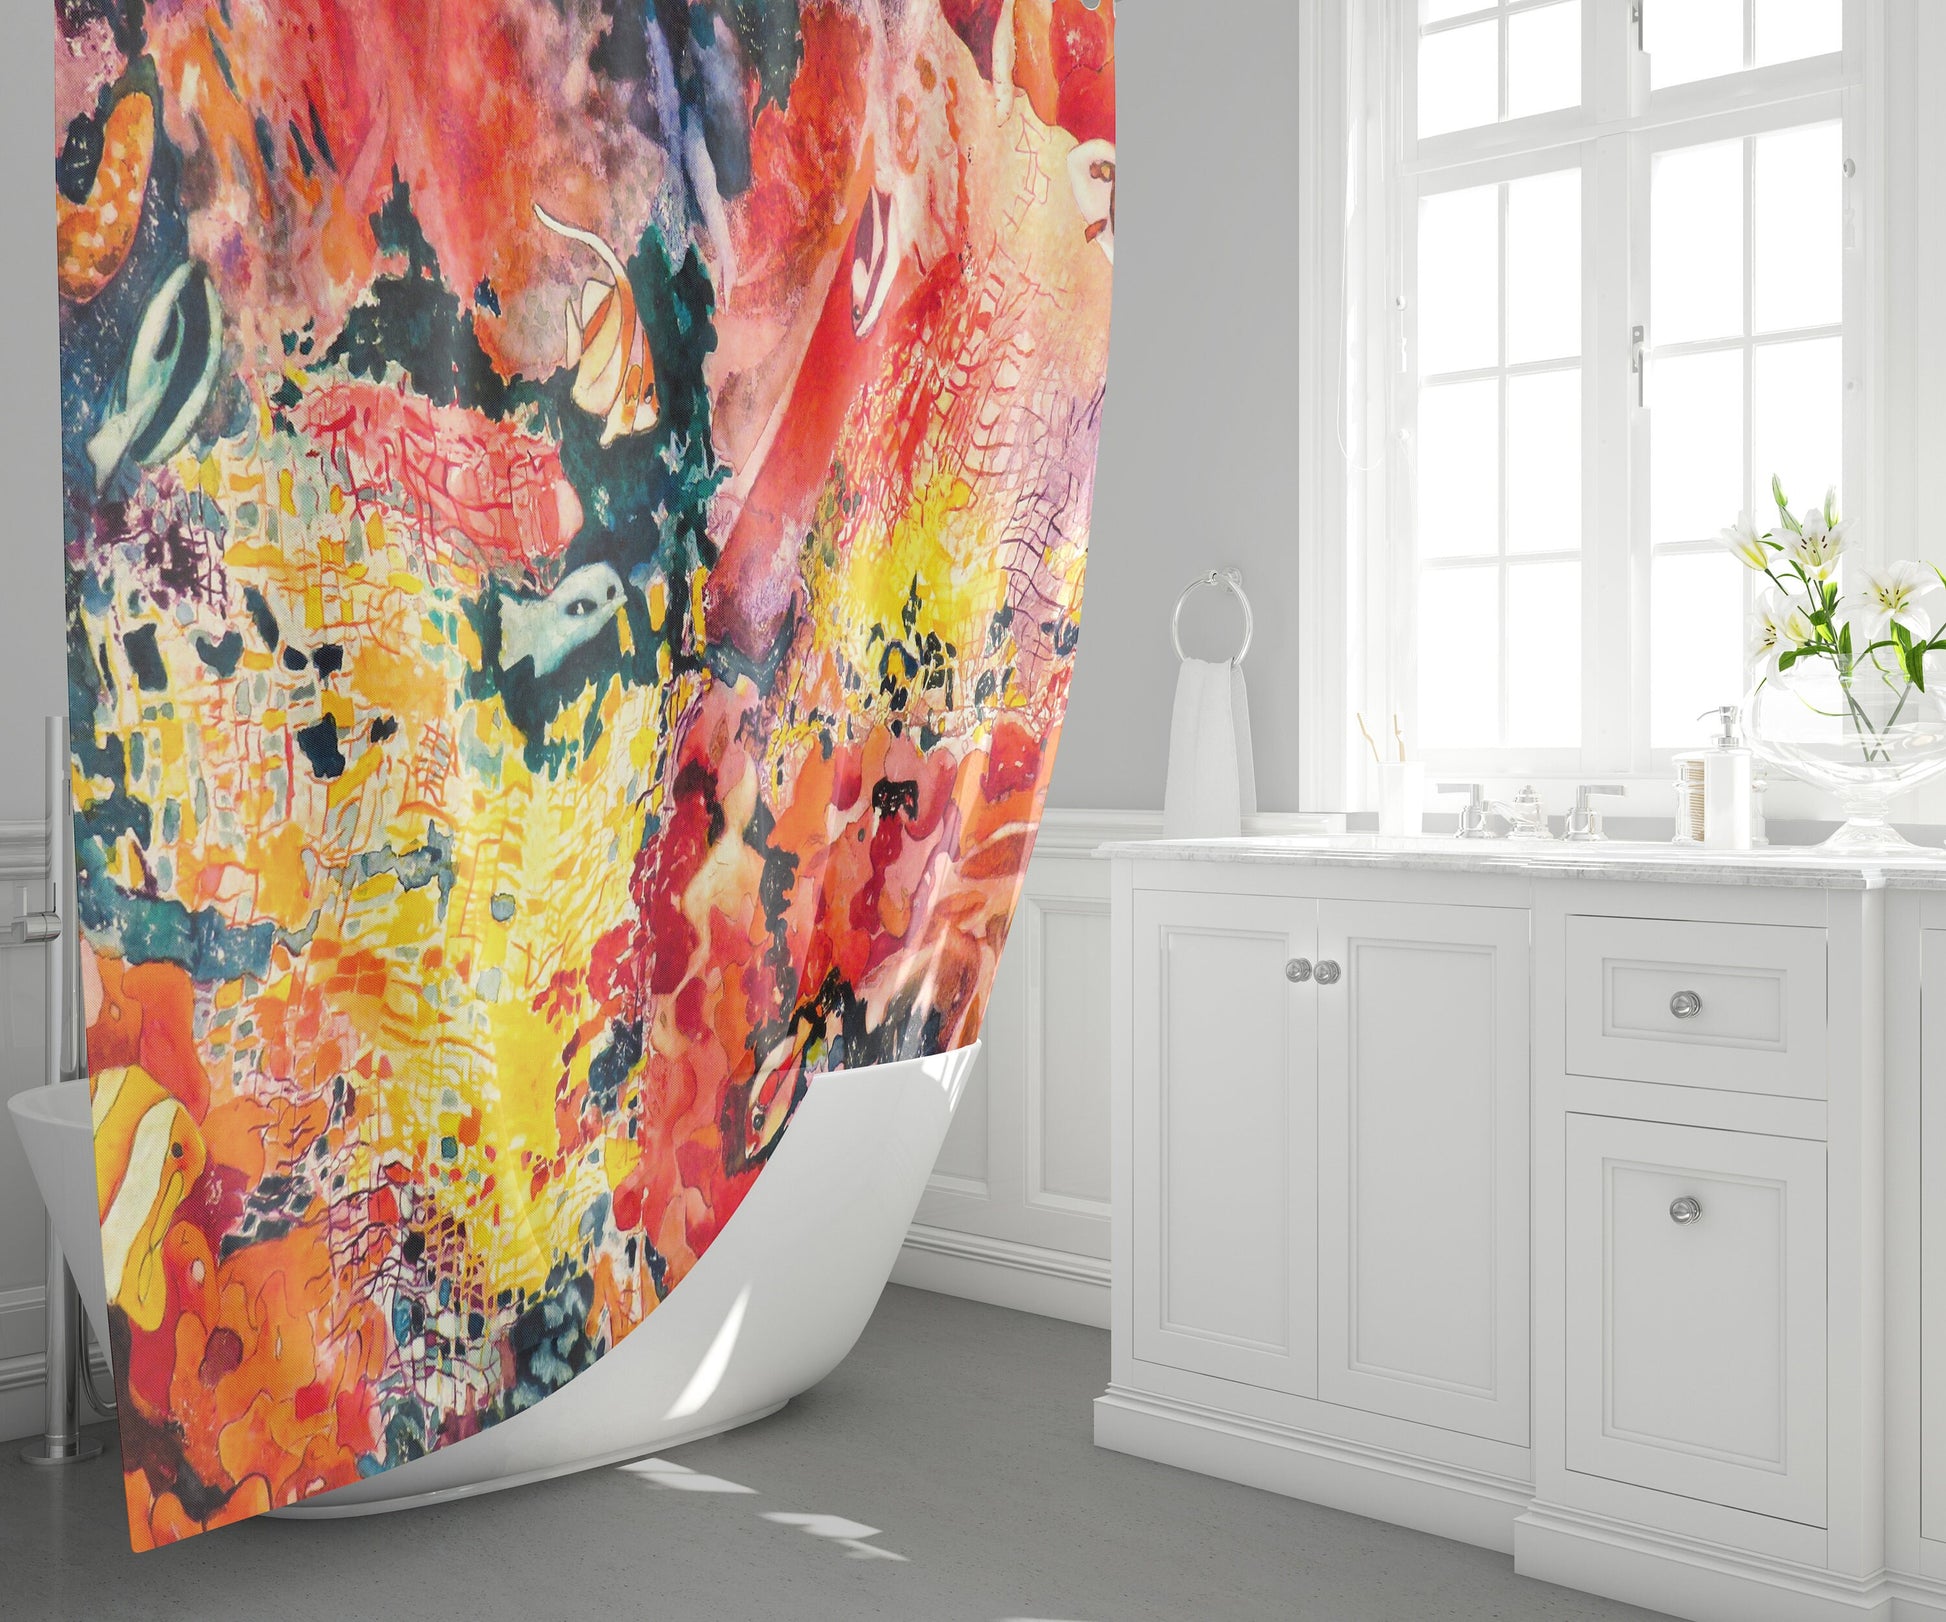 Coral Reef Shower curtain orange shower curtain coral reef abstract art ocean decor fish shower curtain fishes red shower curtain unique